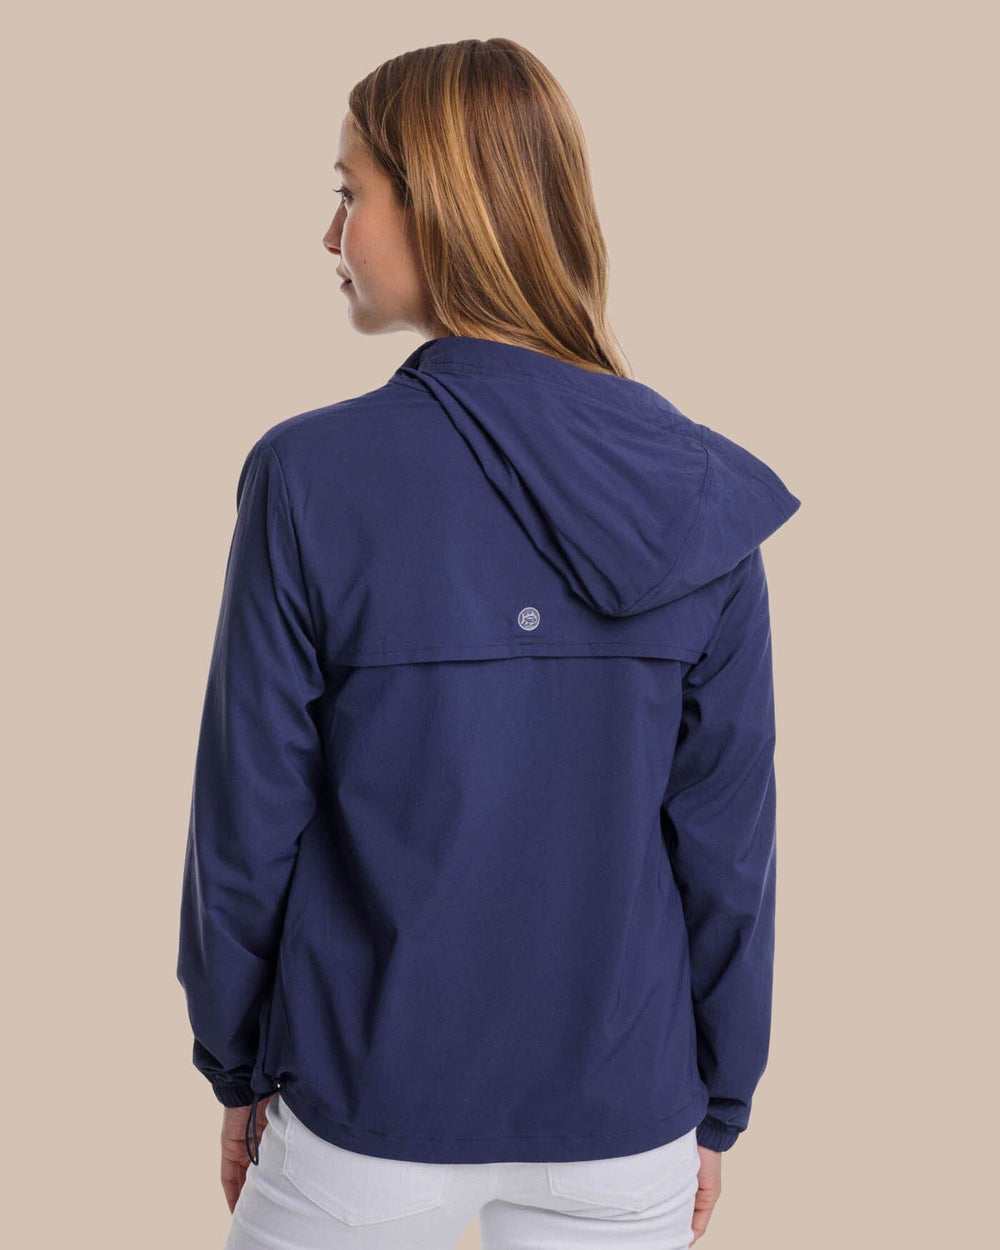 The detail view of the Southern Tide Calie Pop Placket Popover by Southern Tide - Dress Blue